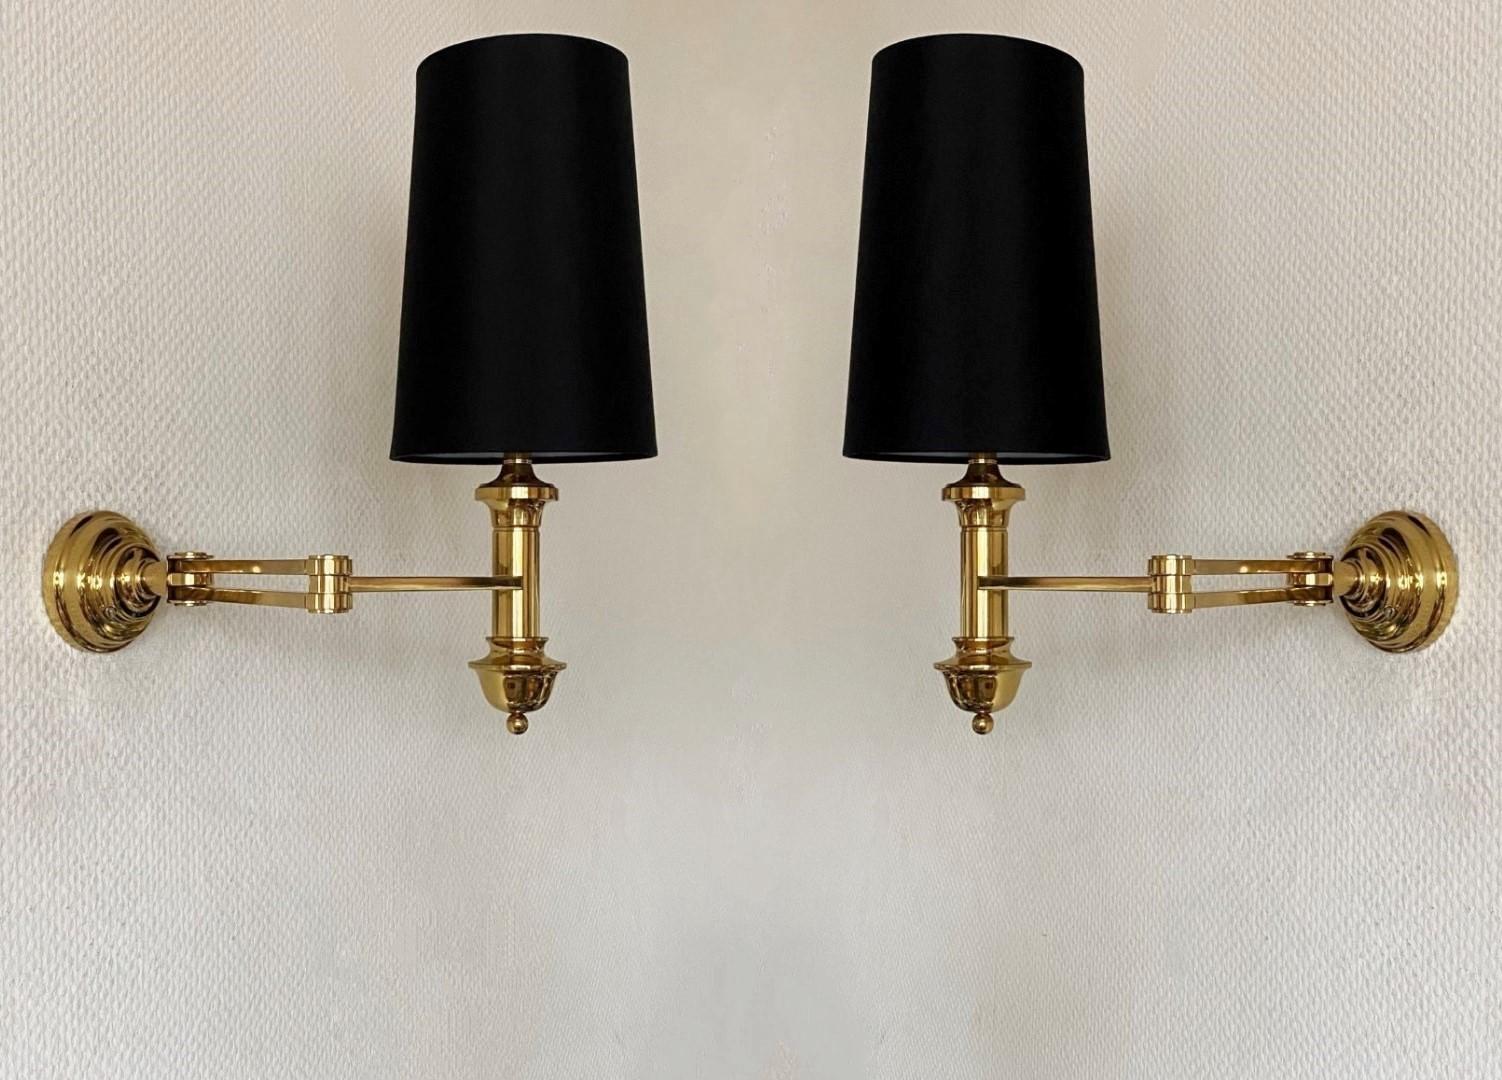 Mid-Century Modern Pair of Maison Jansen Style Brass Swing Arm Wall Sconces Lights, 1960s For Sale